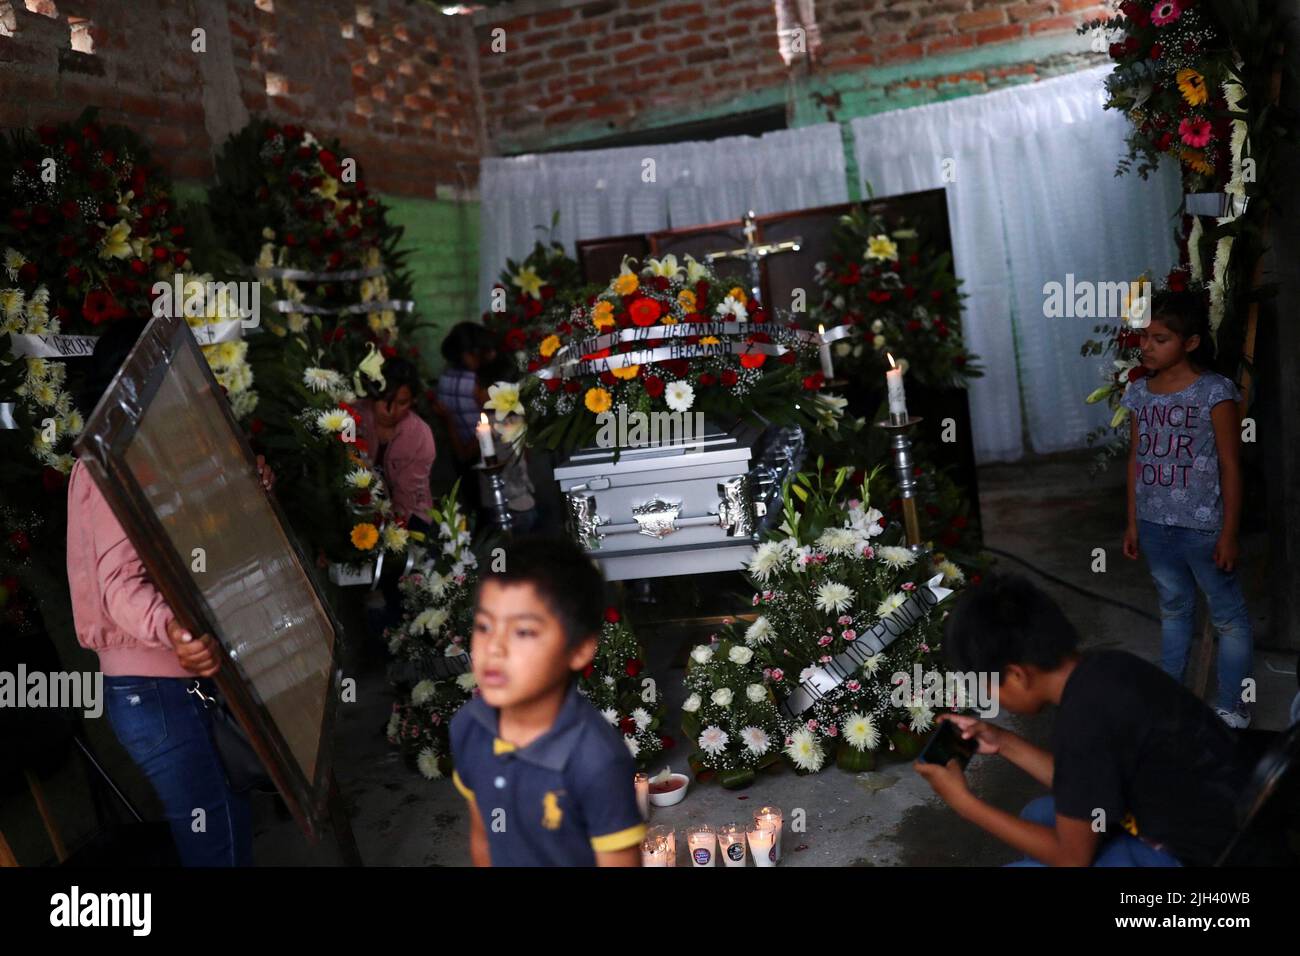 Relatives and friends of late migrant Jose Lopez, 34, attend his wake after being repatriated from San Antonio, Texas, U.S., at his family's home in Celaya, in Guanajuato state, Mexico July 14, 2022. REUTERS/Edgard Garrido Stock Photo